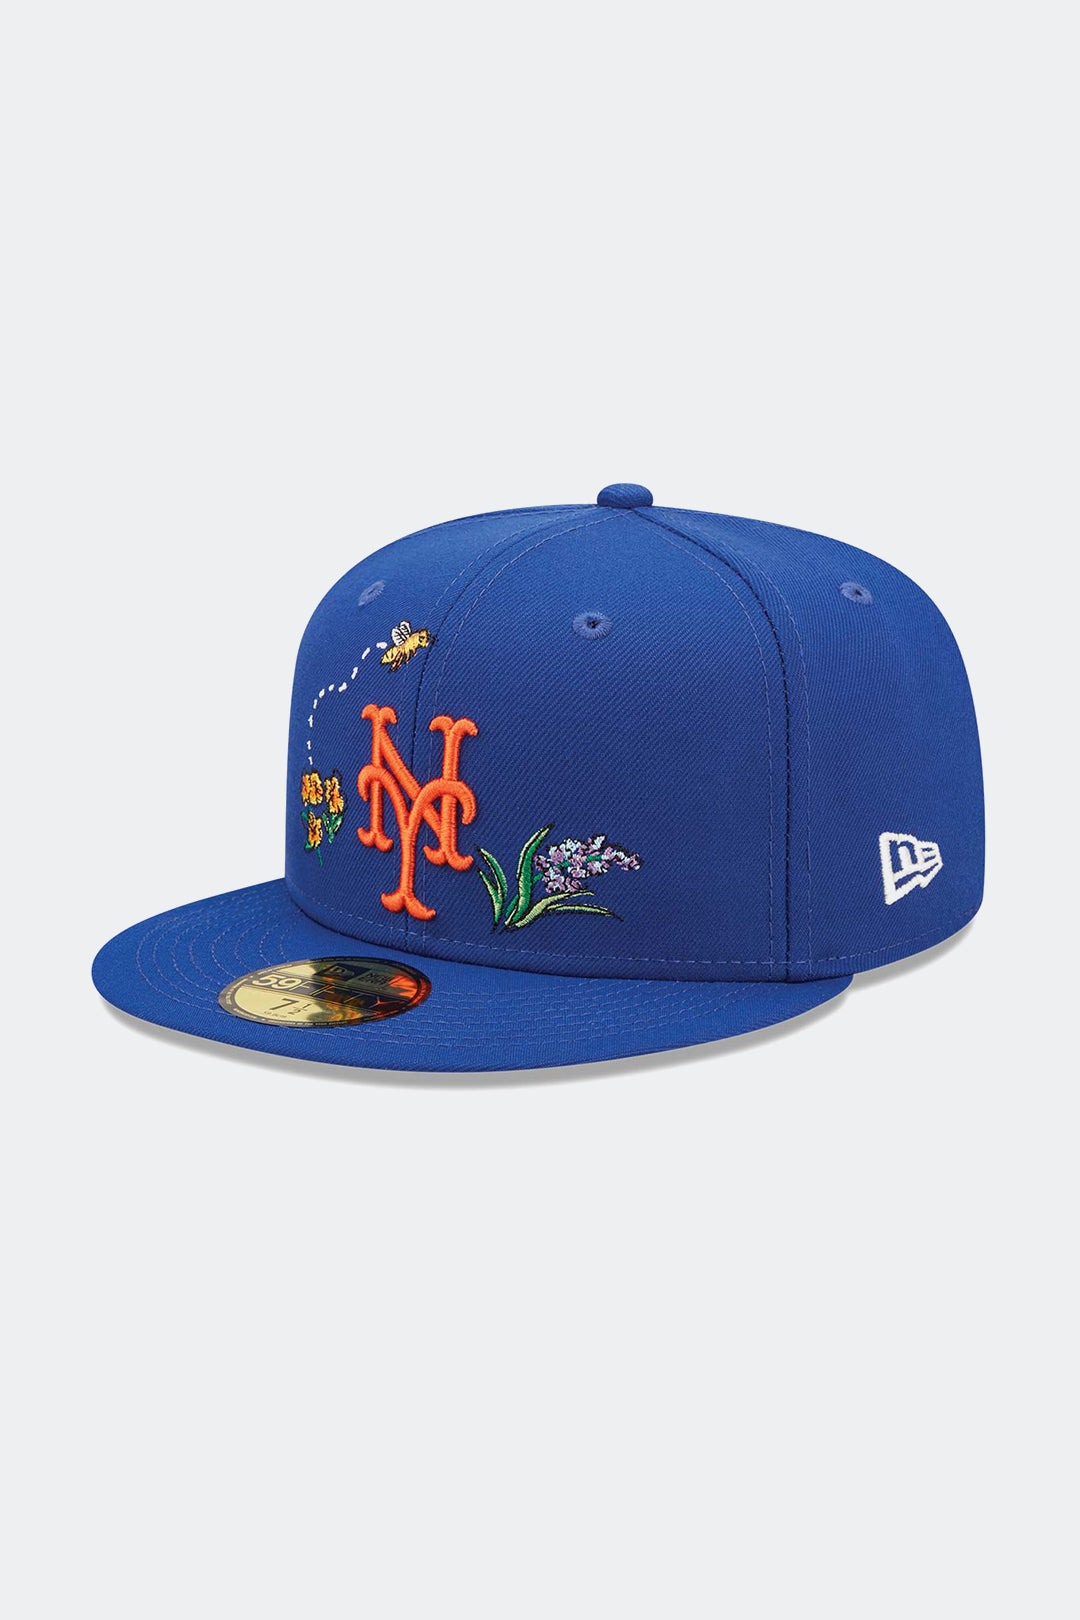 NEW ERA 59FIFTY NEW YORK METS "WATERCOLOR FLORAL" - HYPE